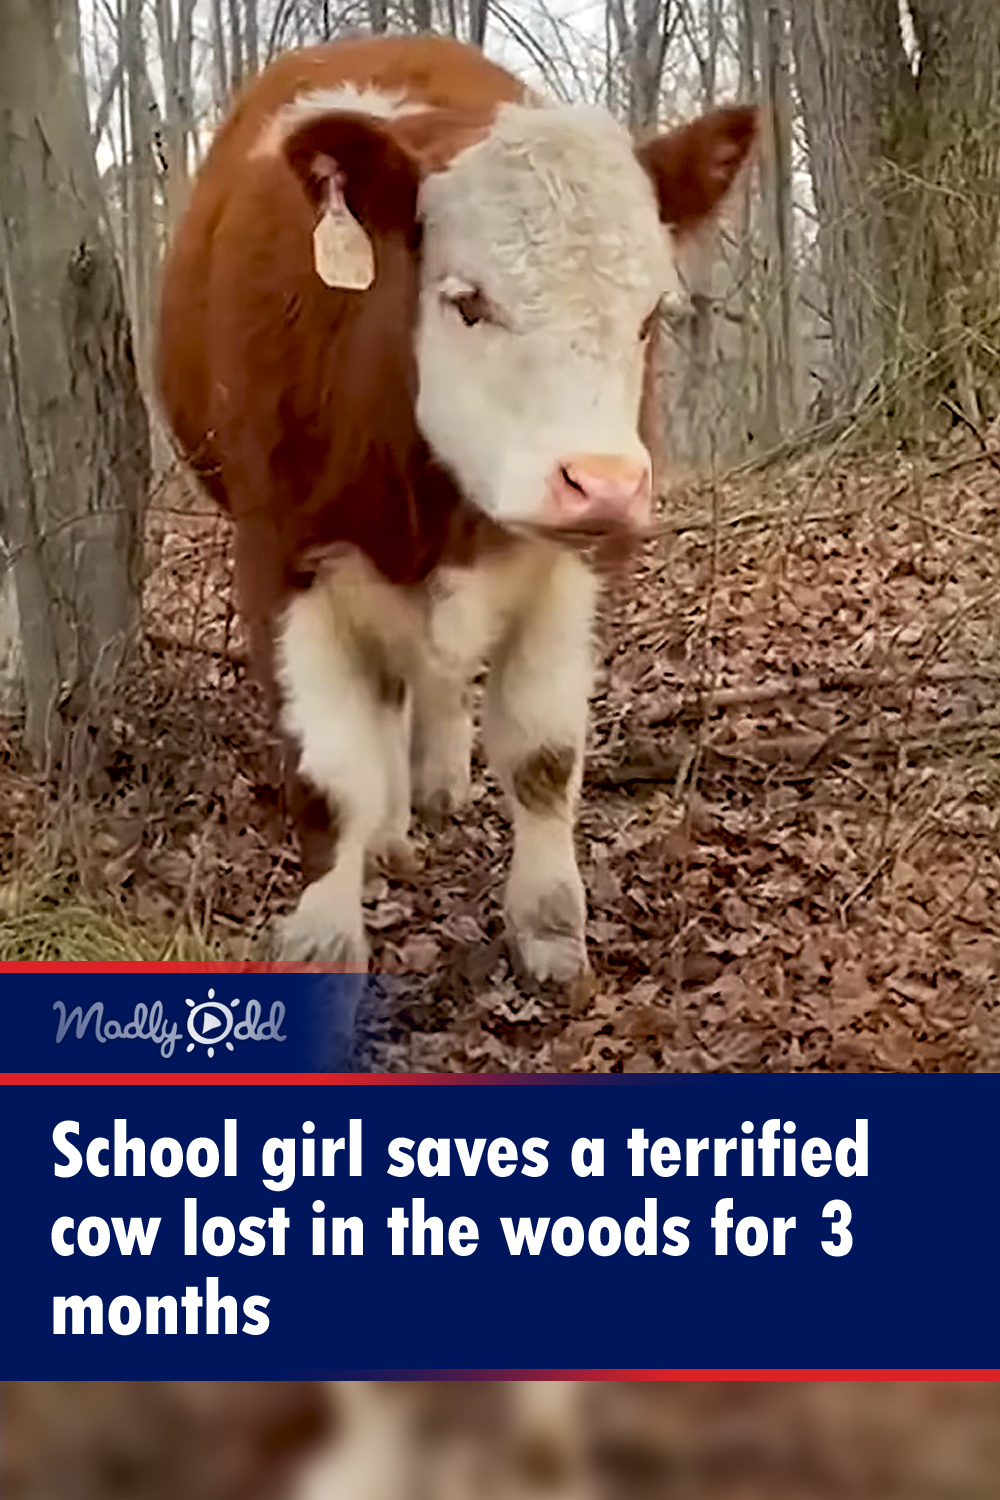 School girl saves a terrified cow lost in the woods for 3 months